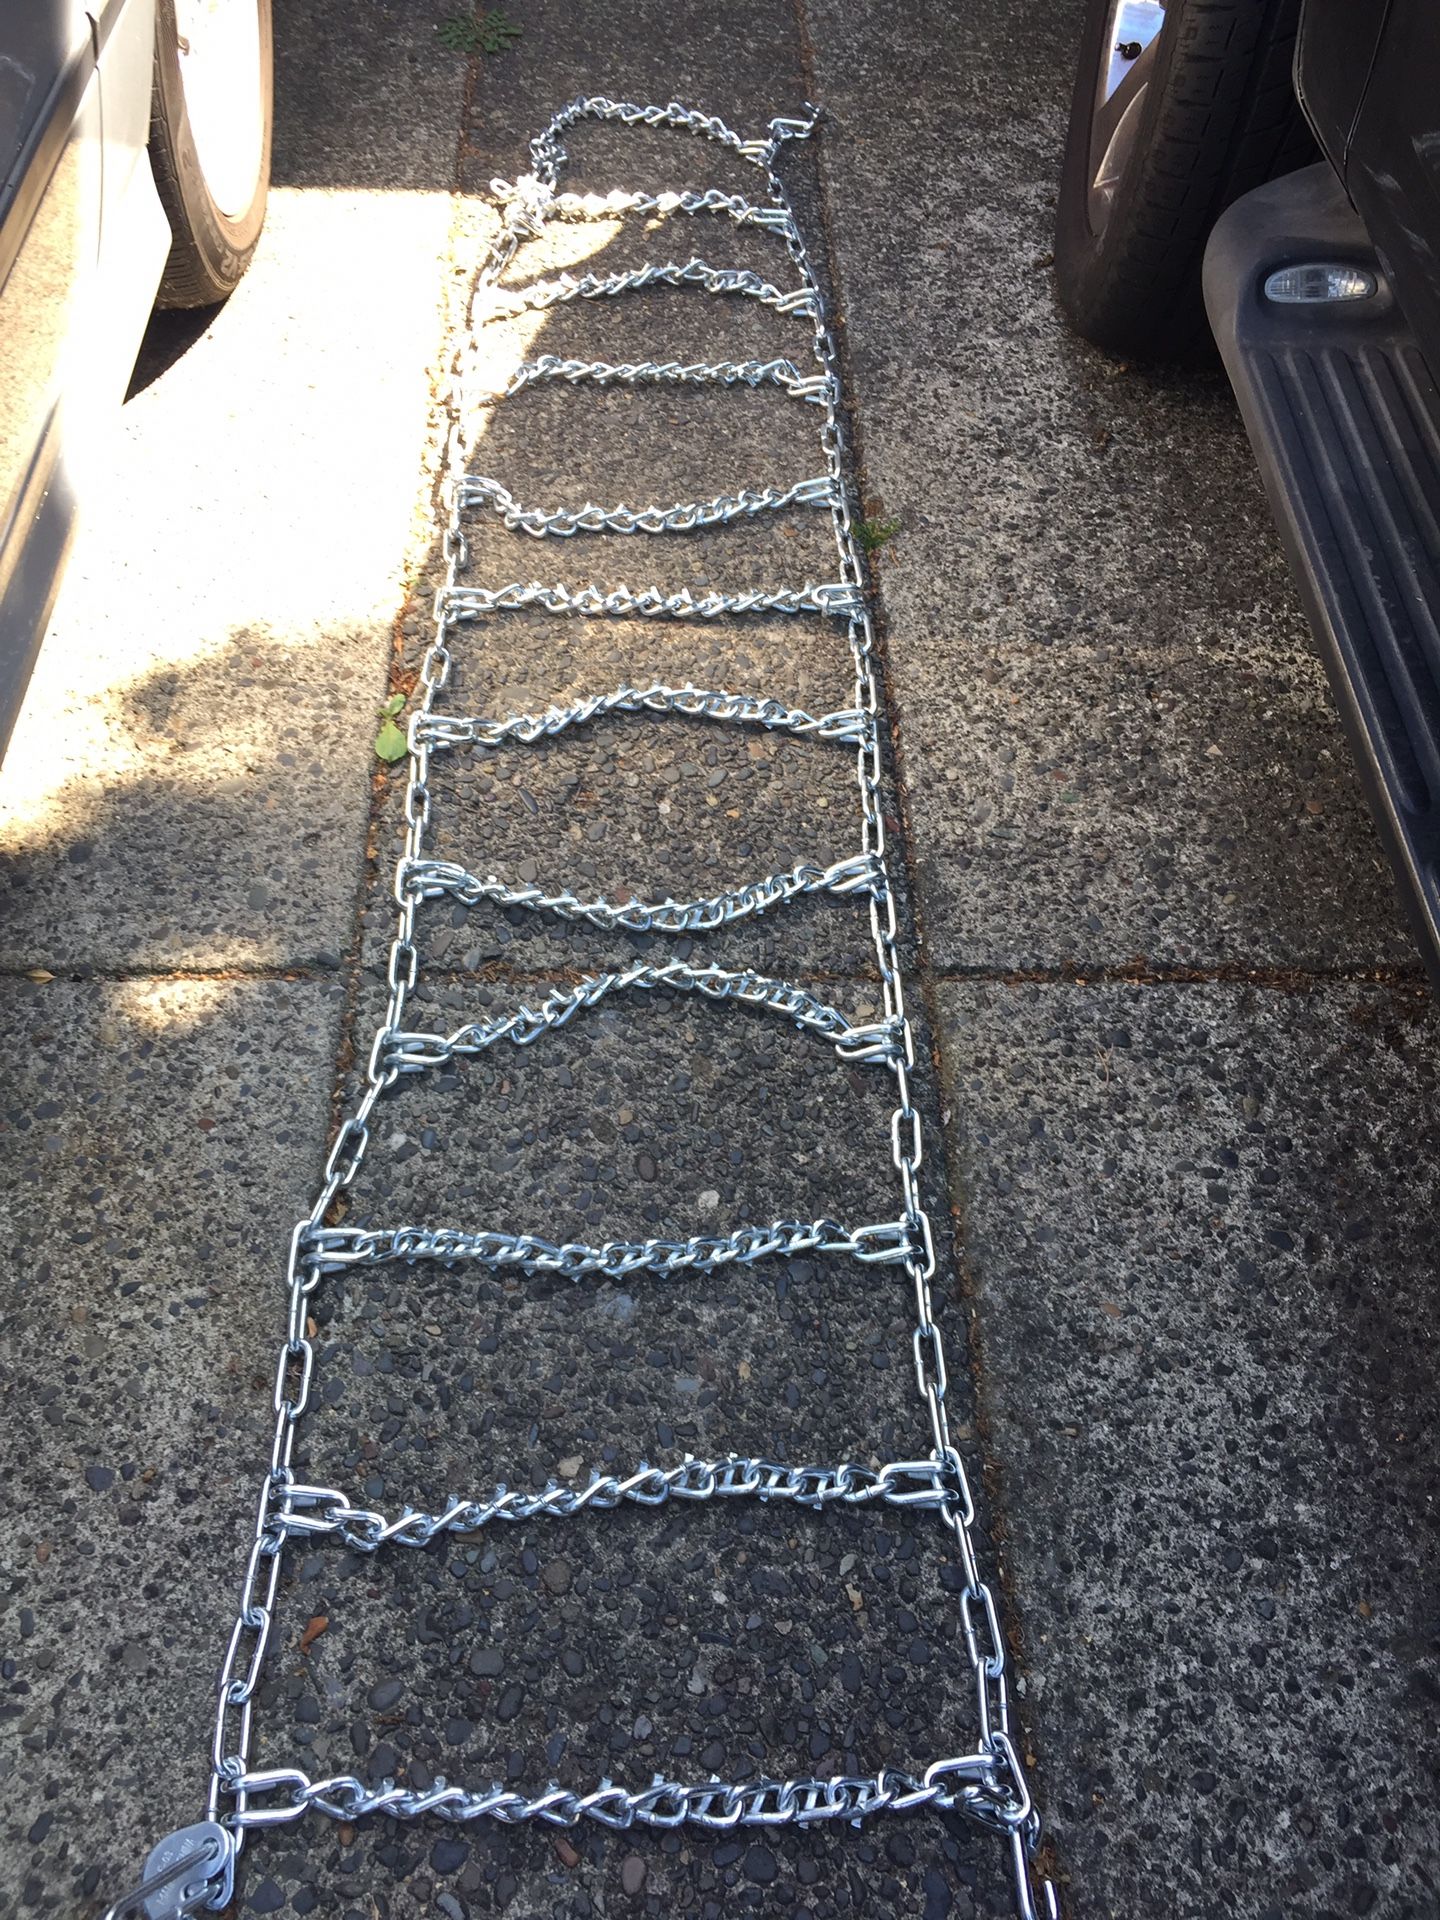 Tire chains with adjustable springs